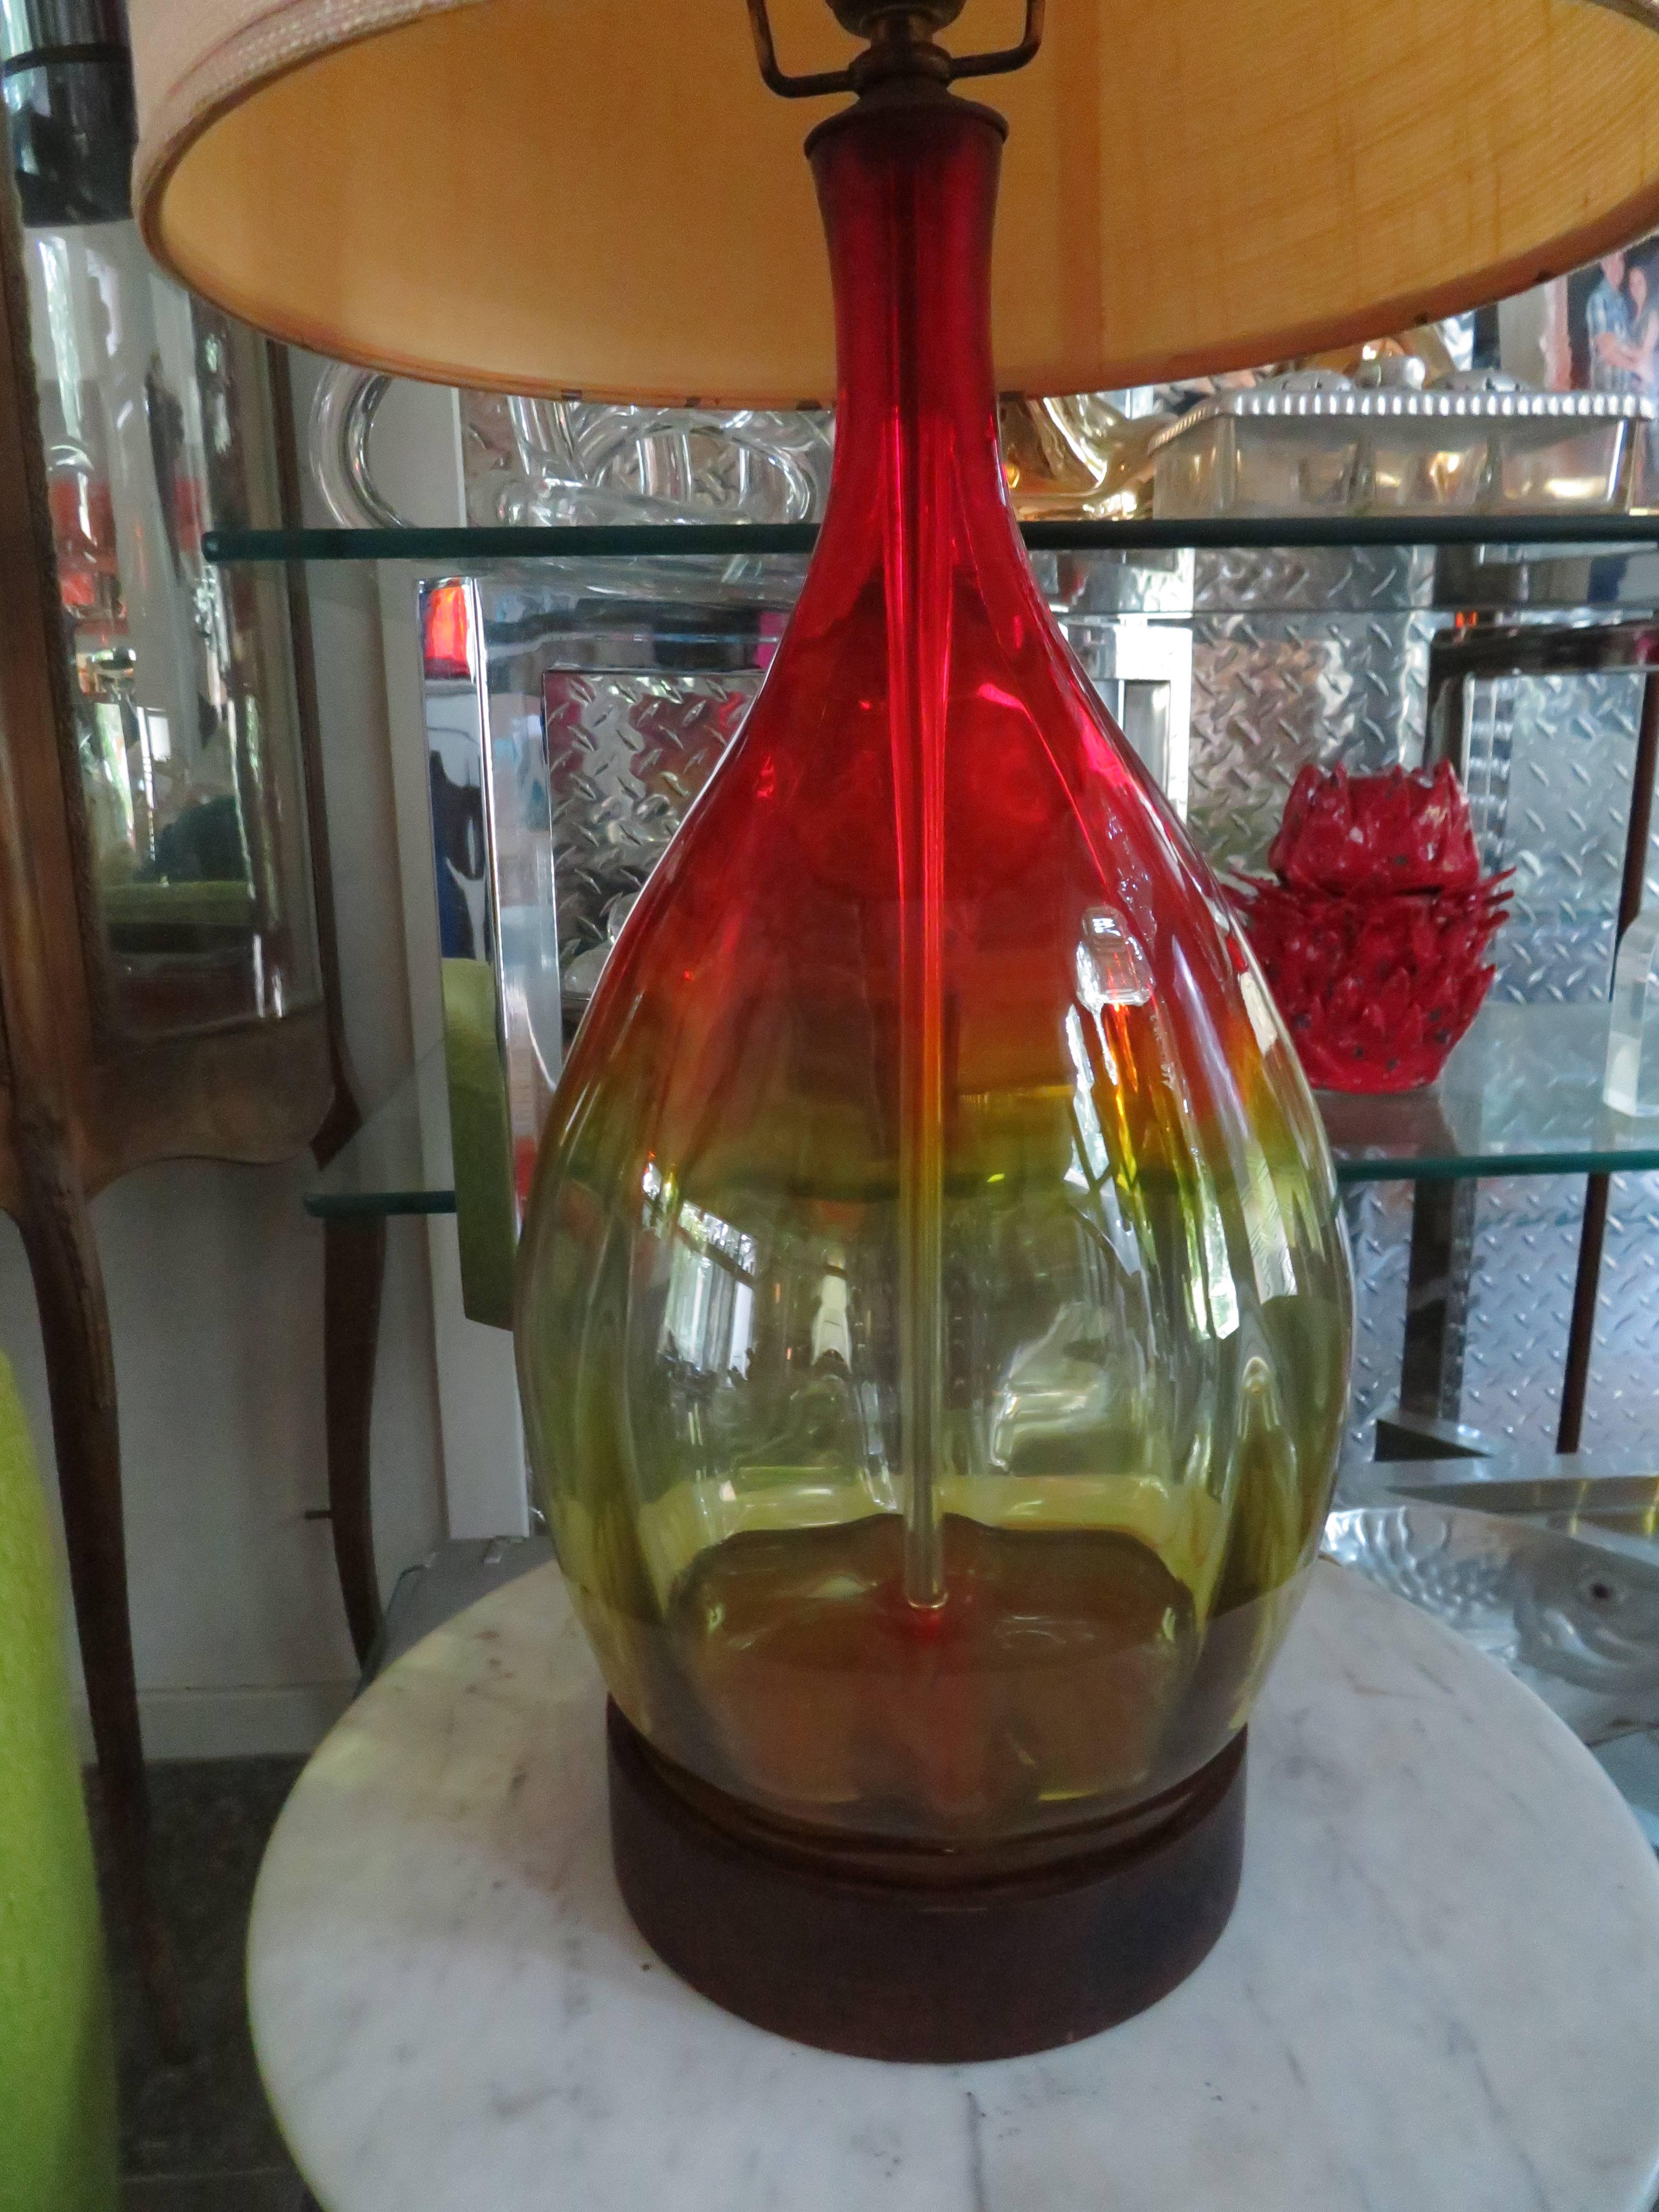 Stunning vintage amberina red and orange Blenko lamp with original finial. The original lampshade show some light wear but the vintage Blenko Glass is in perfect condition. Lamp retains it's original wiring in working order.